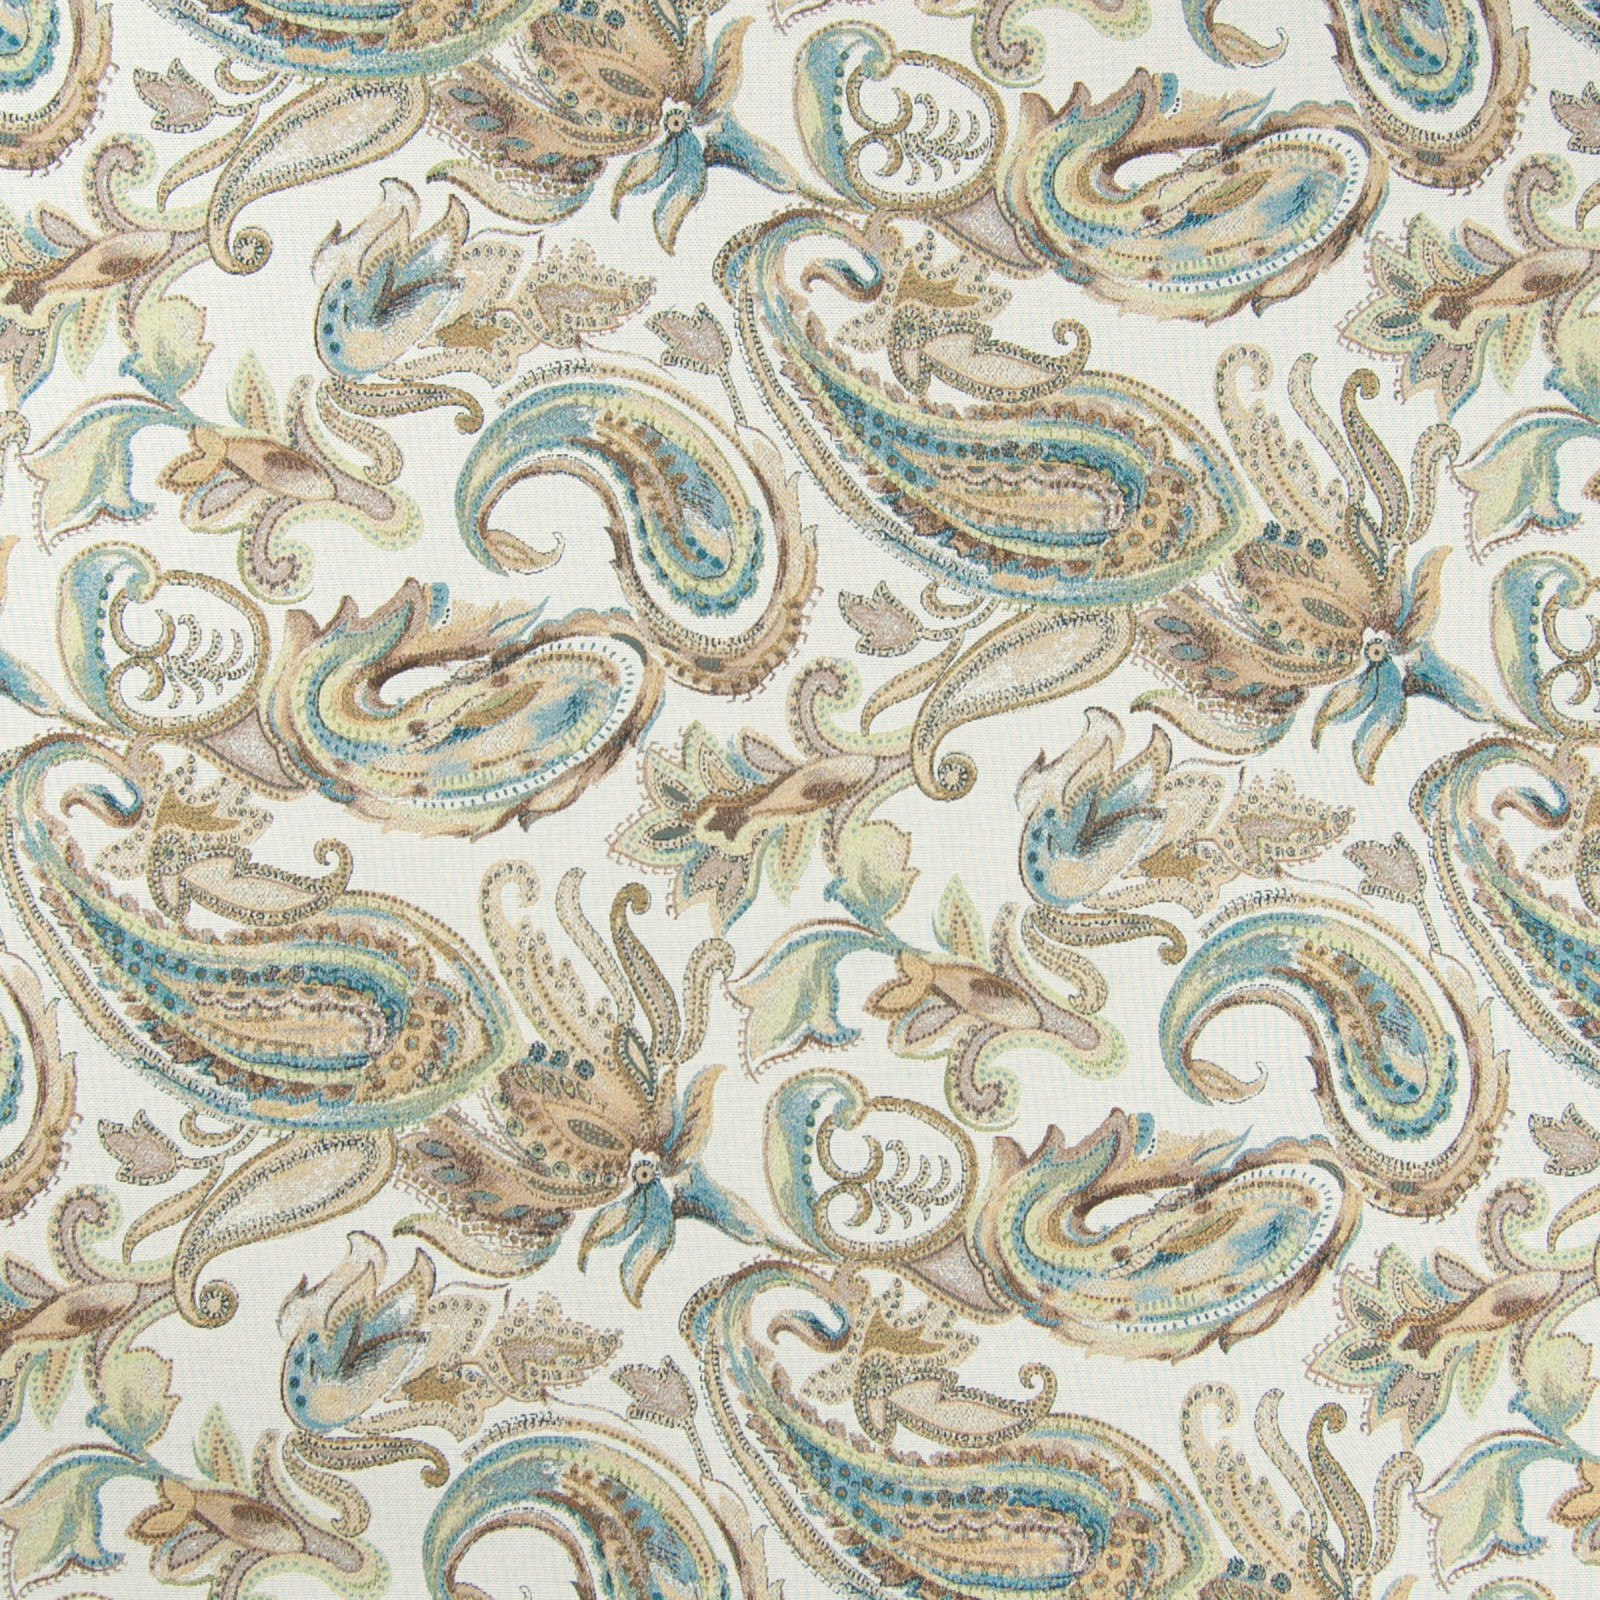 Nutmeg Blue and Teal Paisley Jacquard Upholstery Fabric by the yard G8432